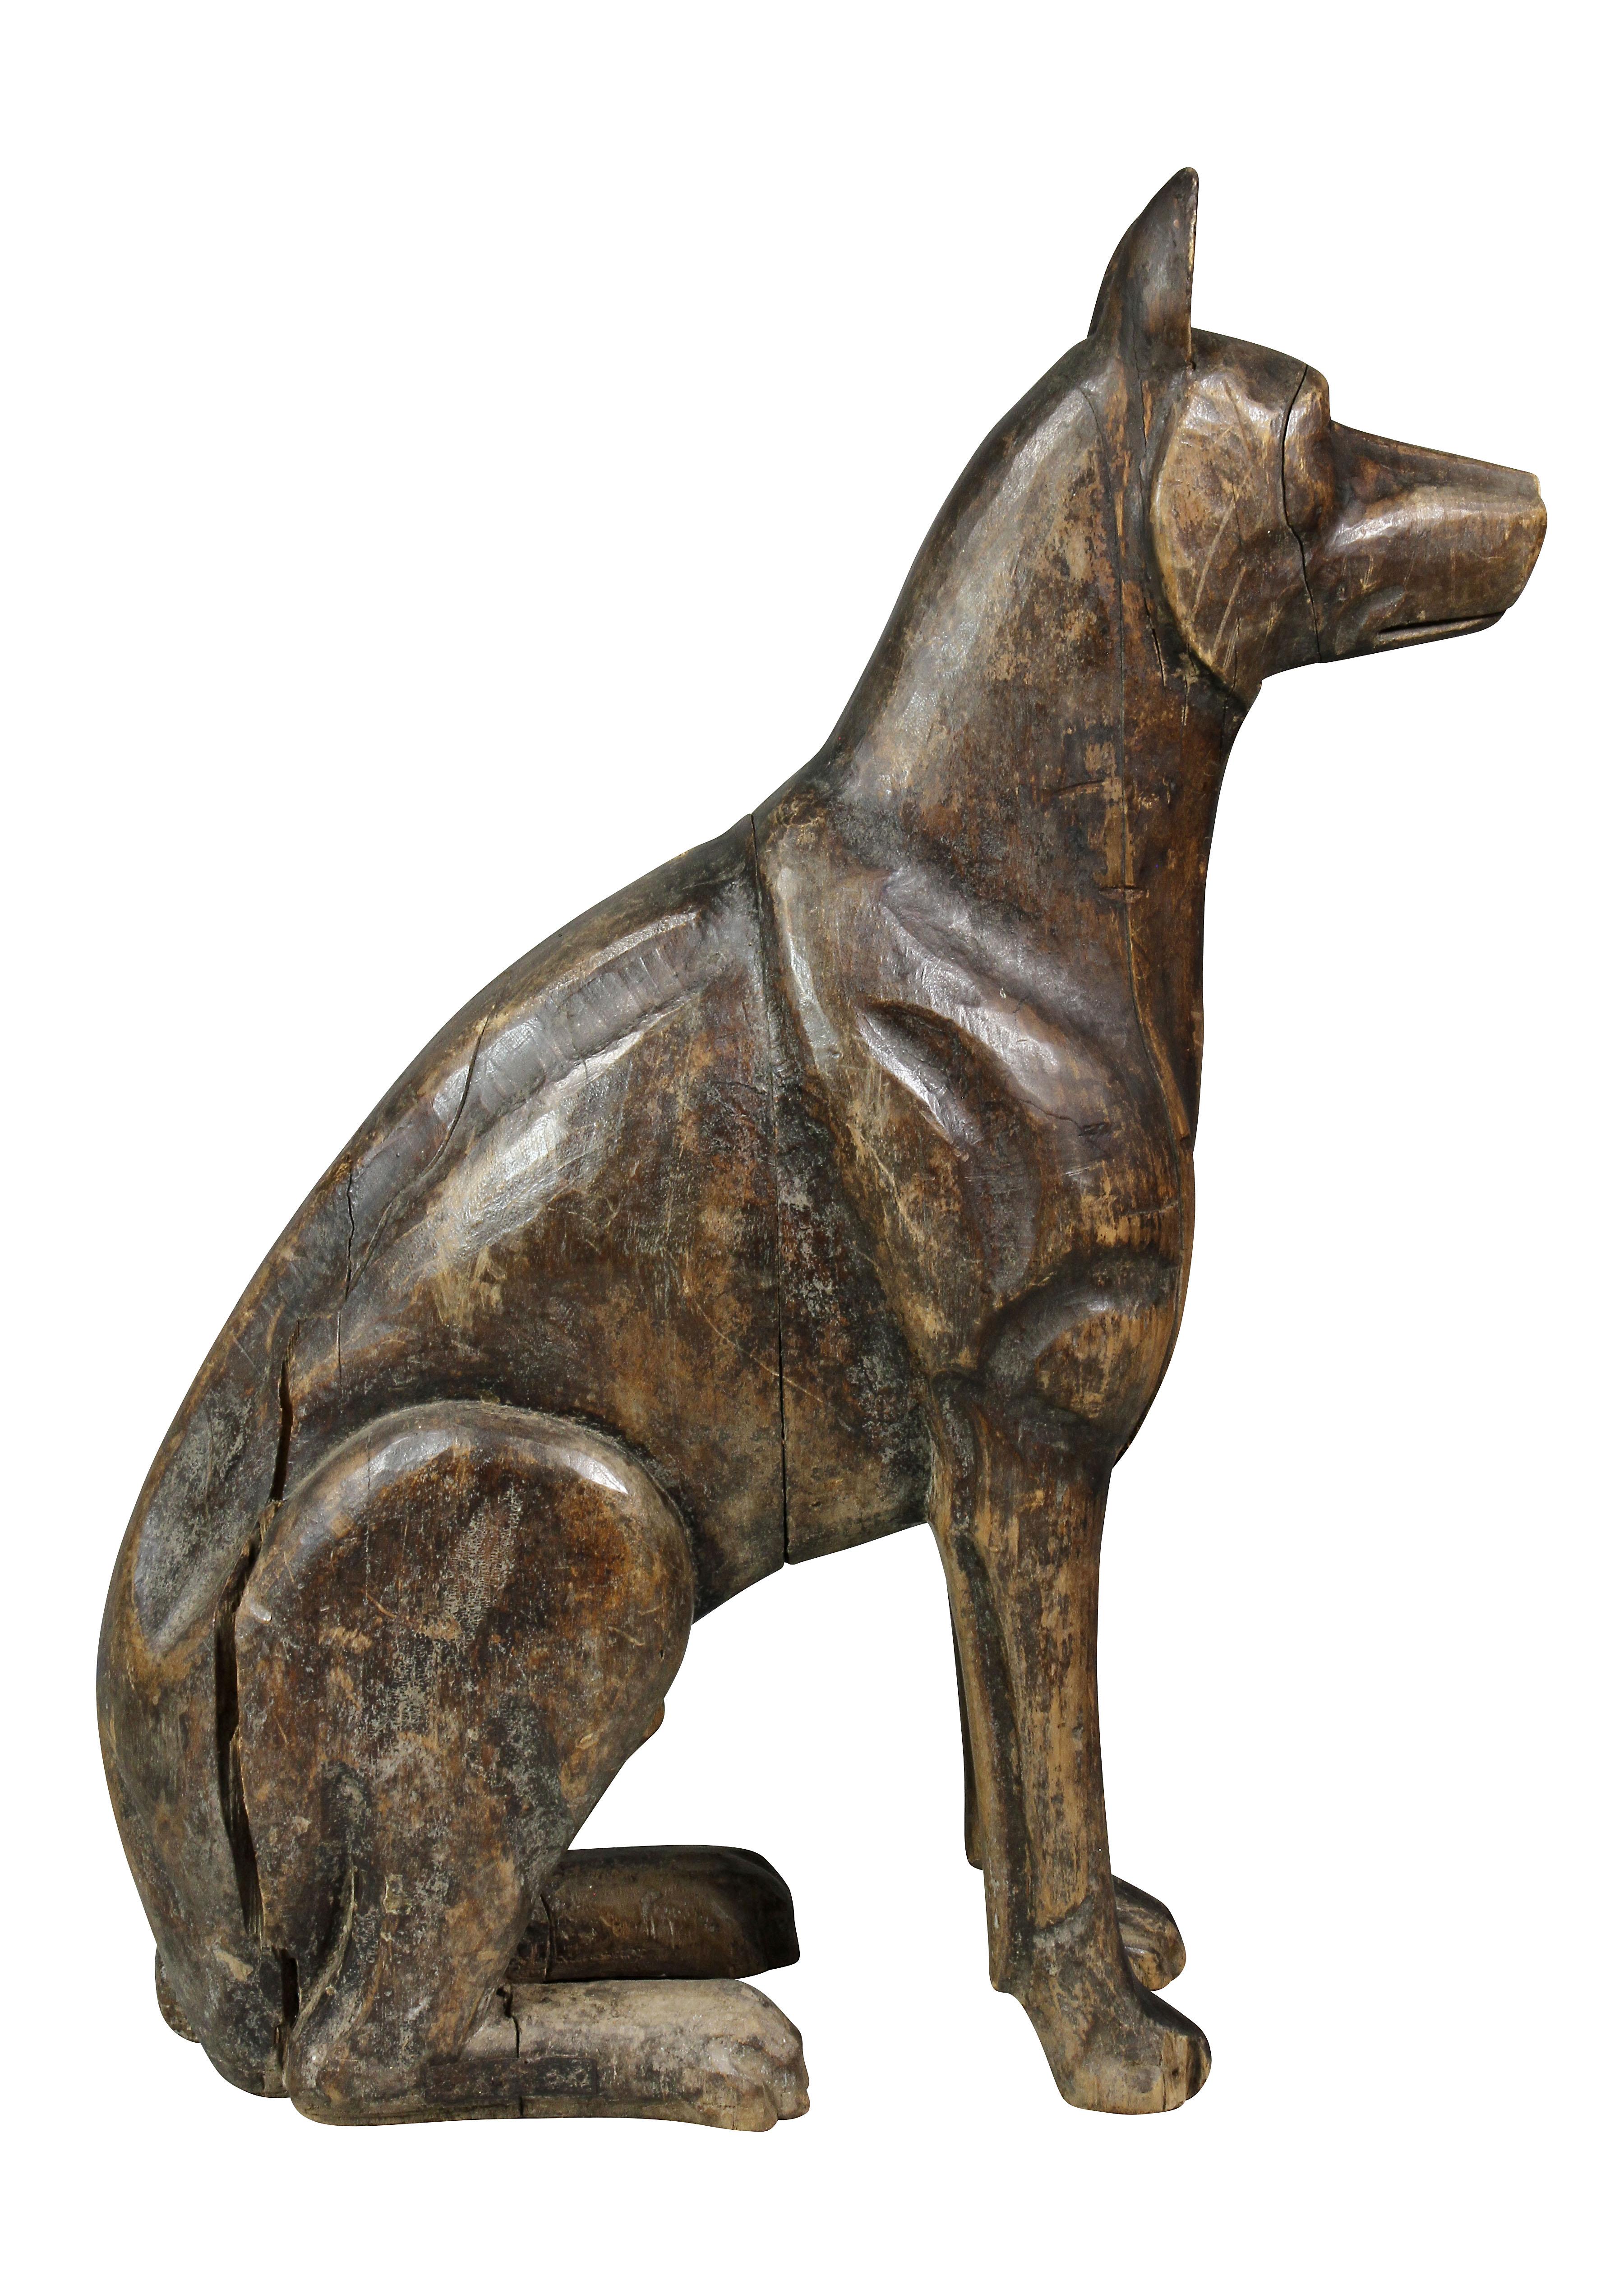 English Carved Wood Figure of a Dog